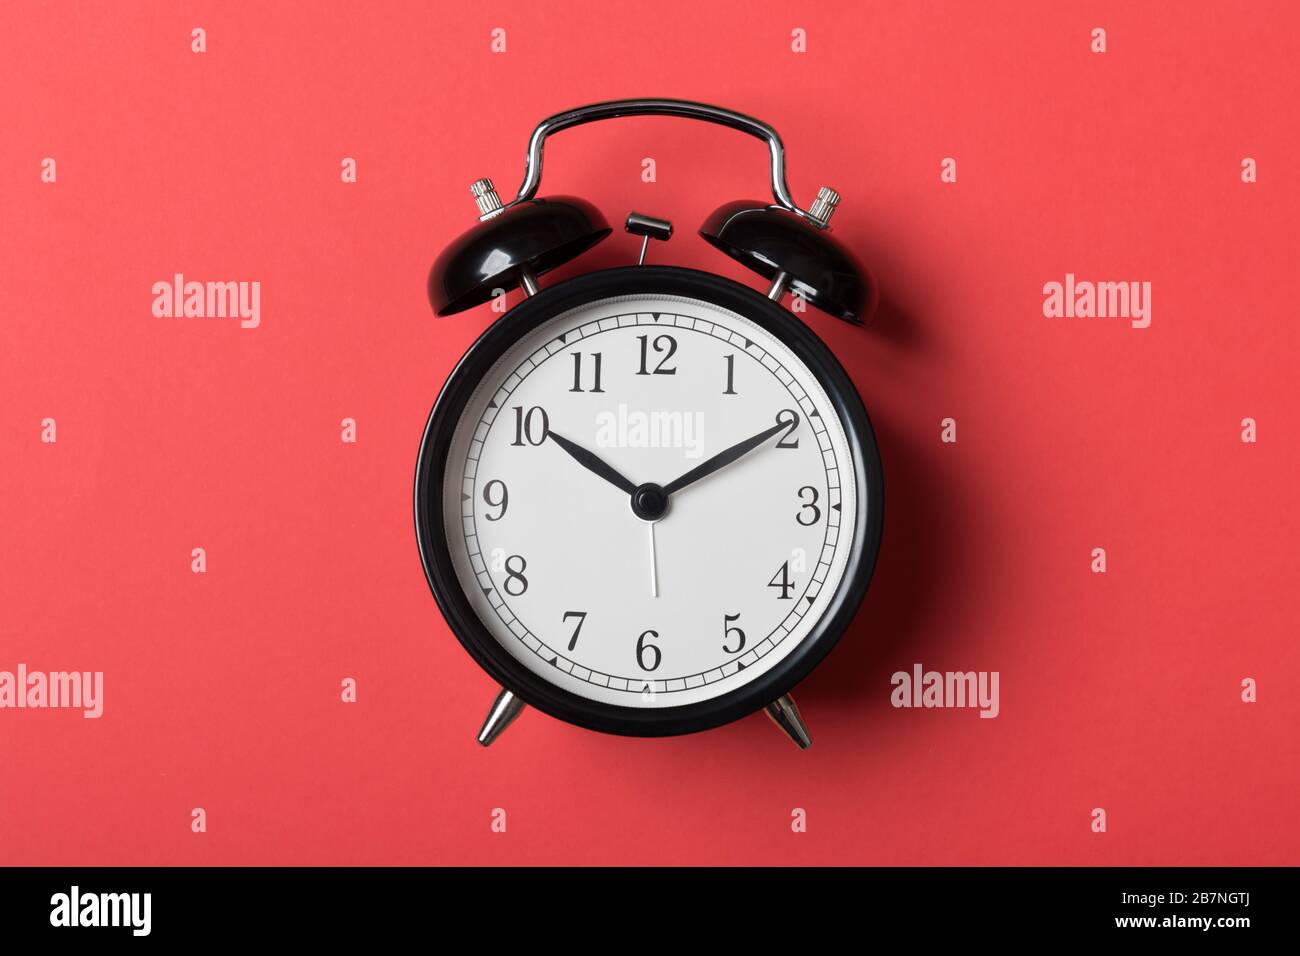 Black vintage alarm clock on red background. Time concept Stock Photo